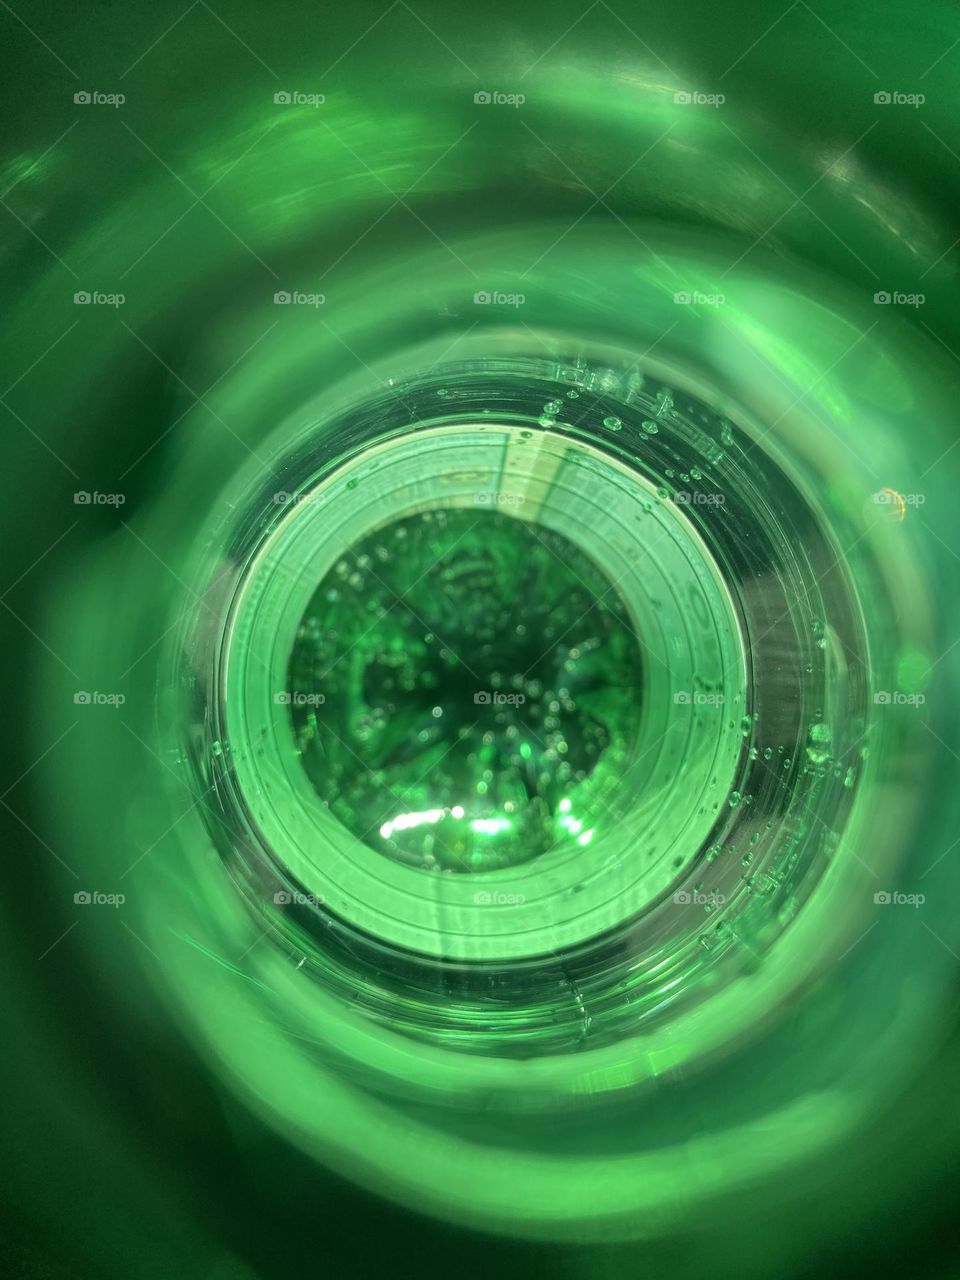 Concentric green rings surround a darker sparkly center in this photo of the inside of a San Pellegrino mineral water bottle. 